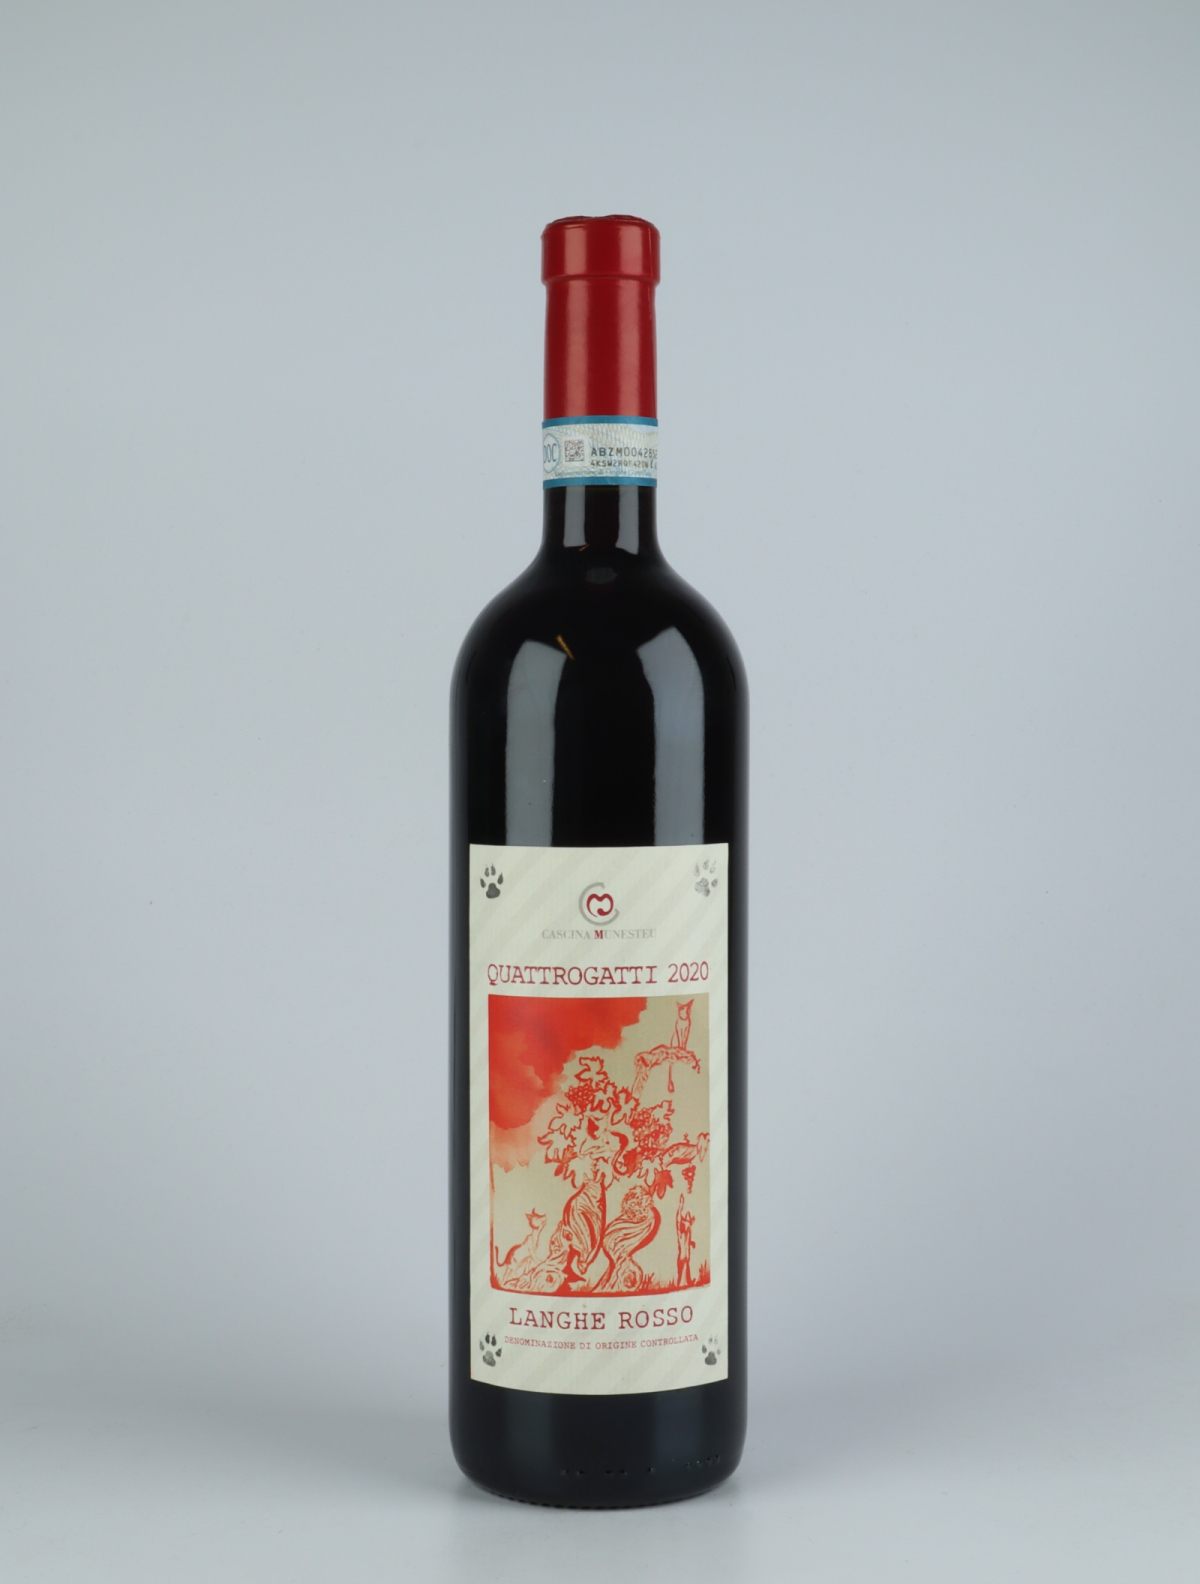 A bottle 2020 Langhe Rosso - Quattrogatti Red wine from Cascina Munesteu, Piedmont in Italy